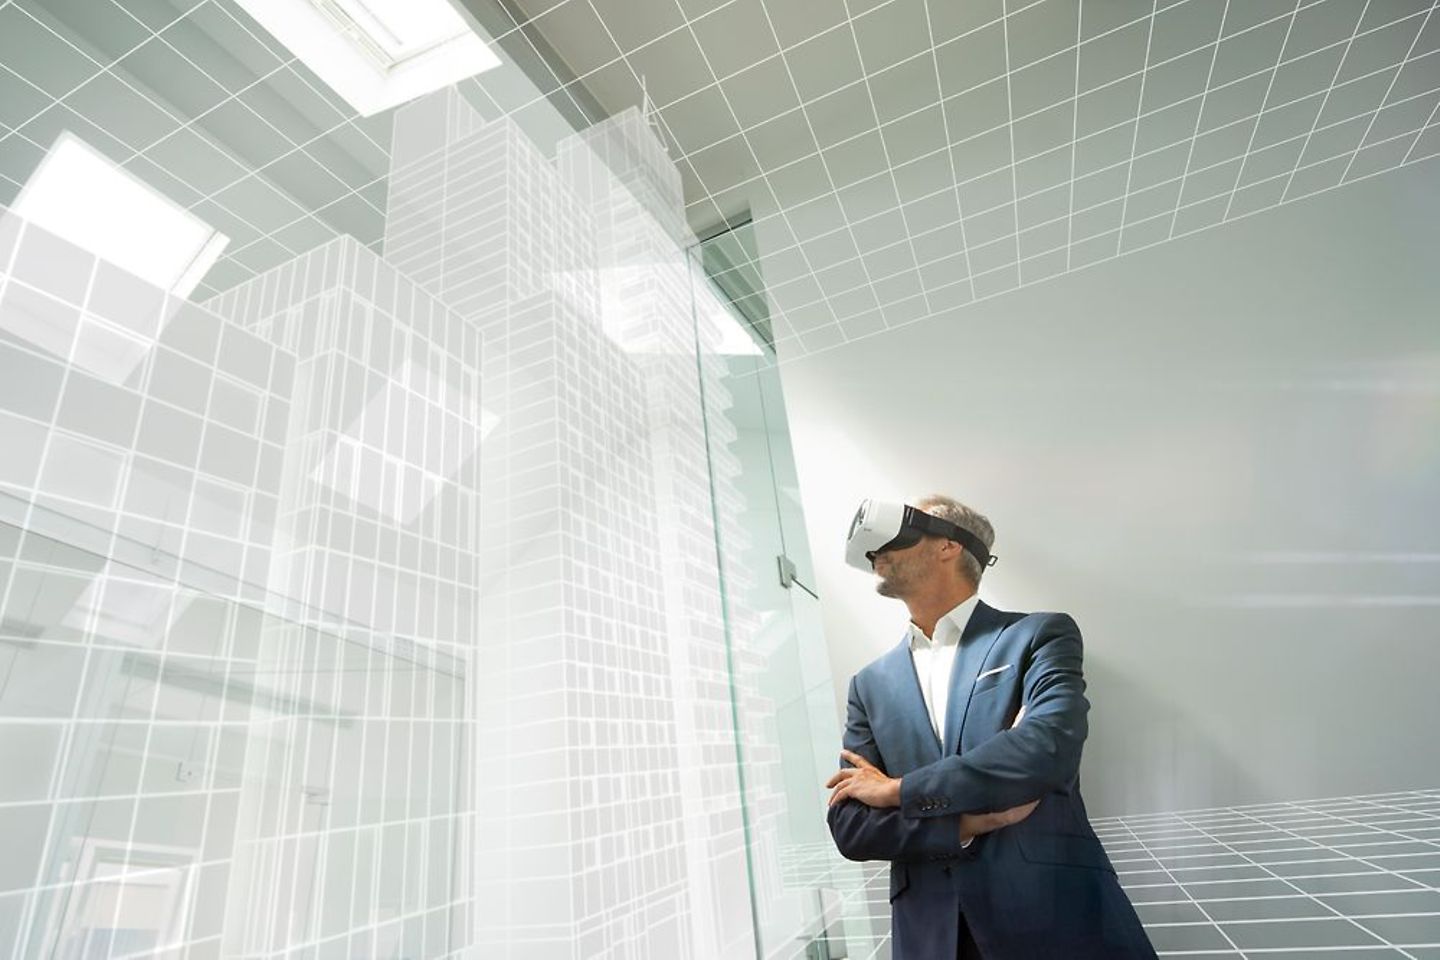 Employee with VR glasses in an abstract office building